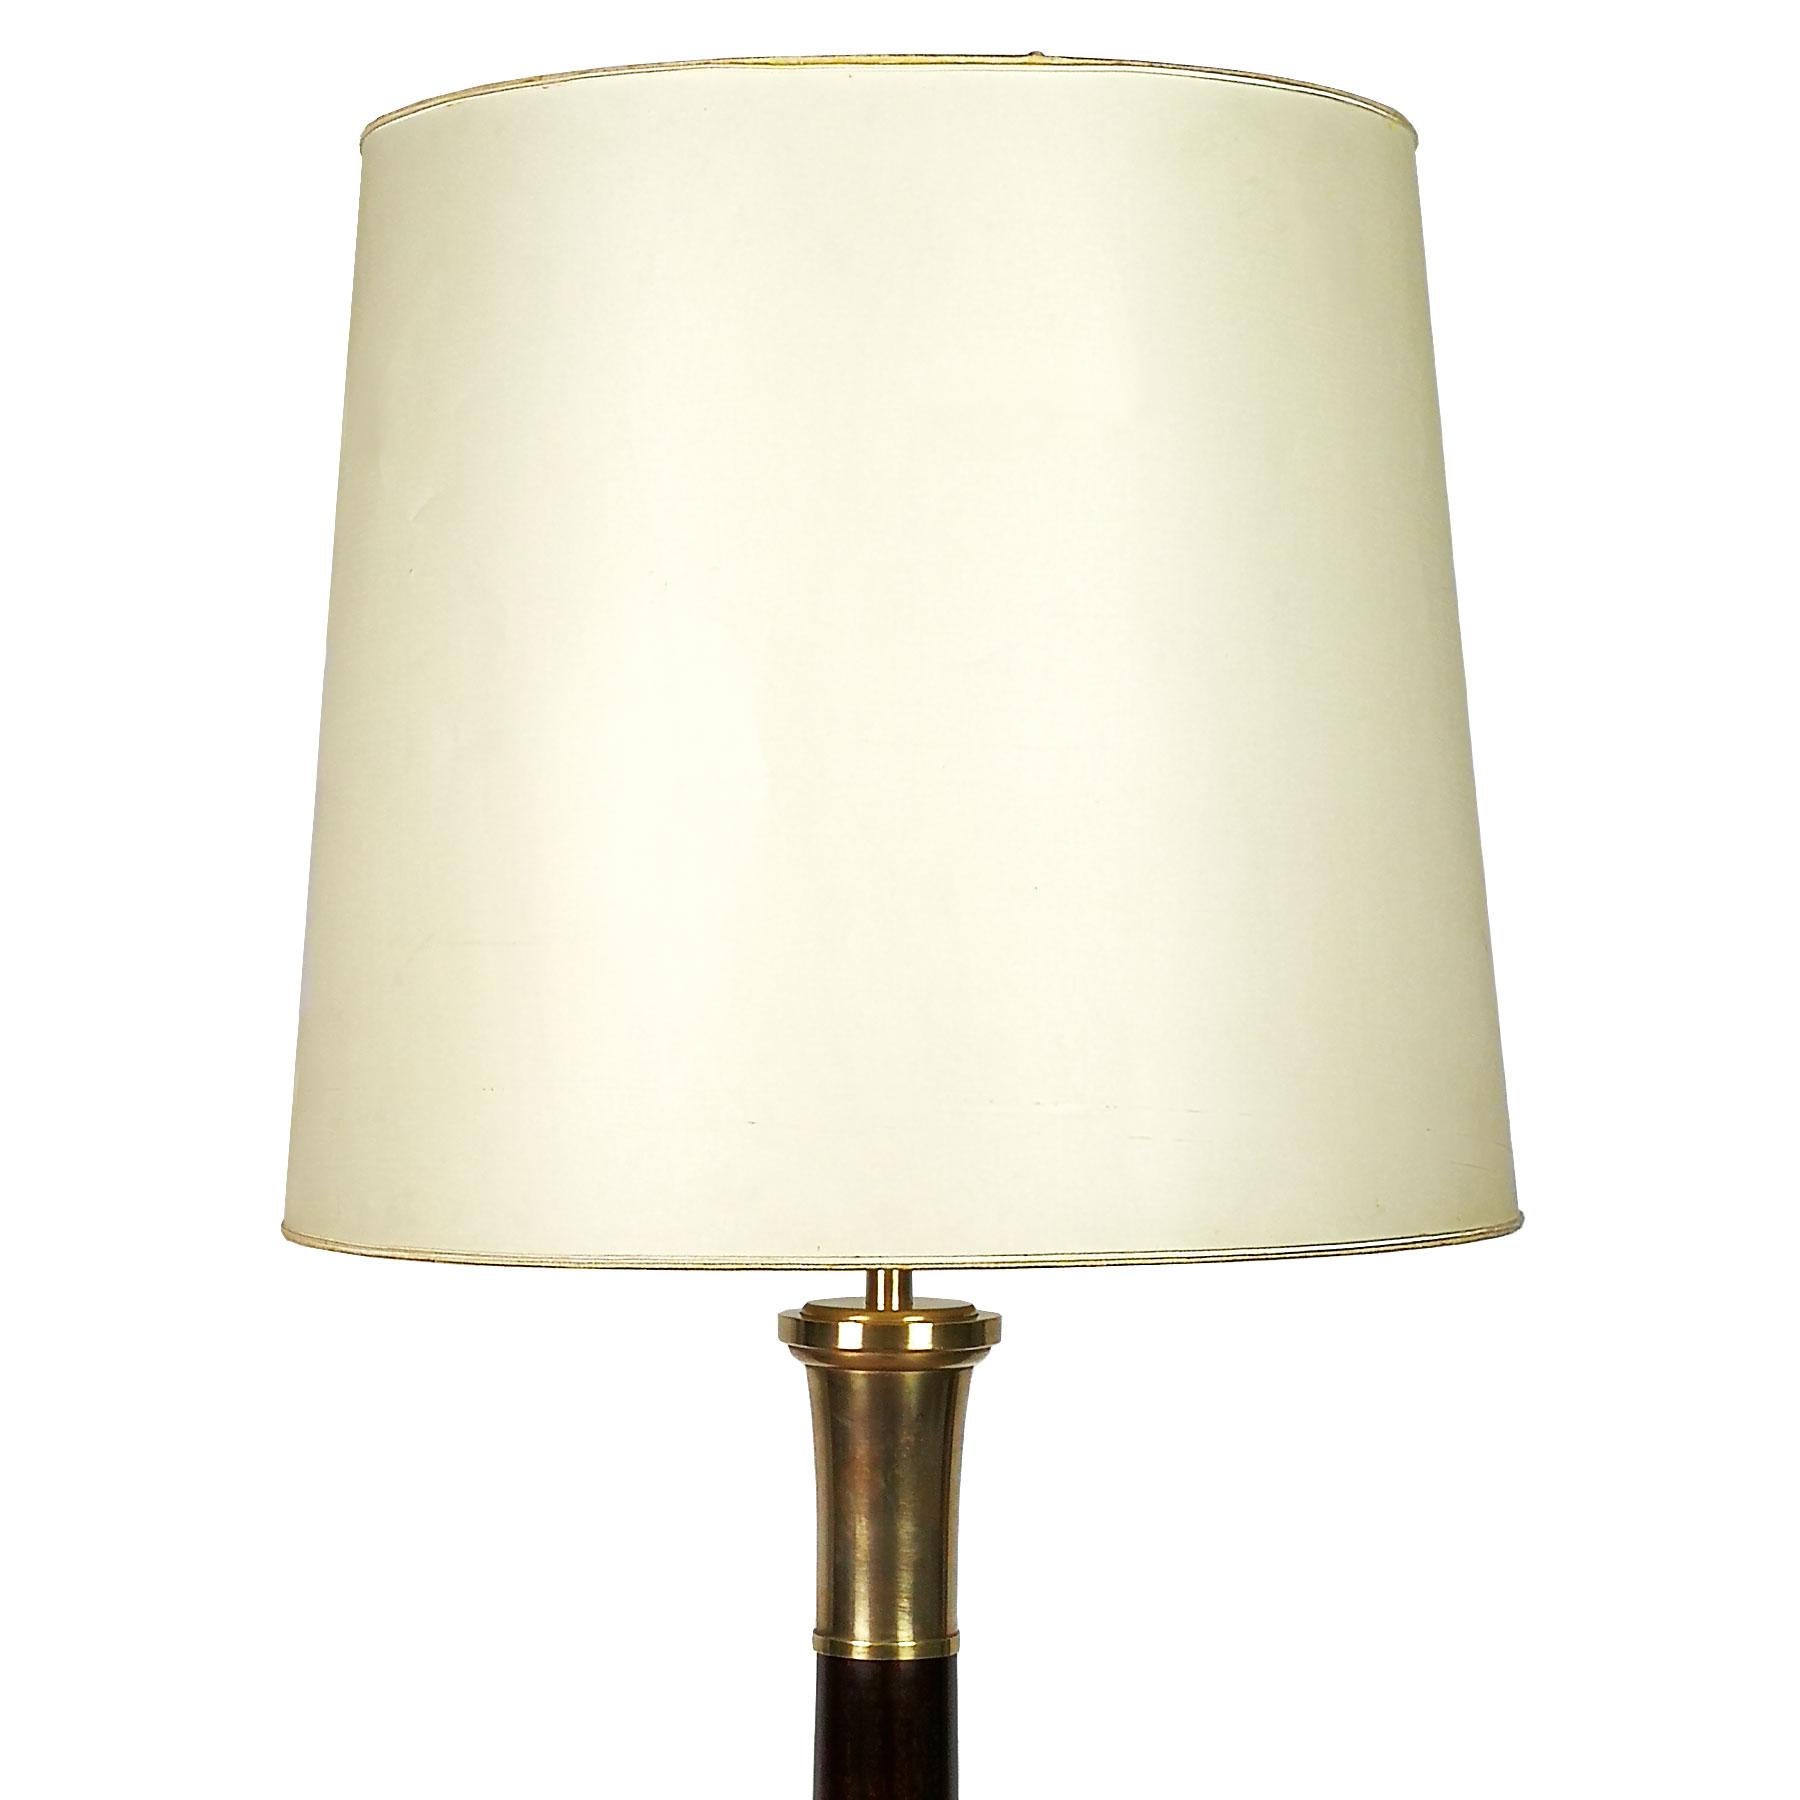 Standing lamp in solid mahogany, French polish and polished brass. Three-light, new lampshade done as the original in beige fabric.
Maker: Metalarte
Spain, circa 1960.